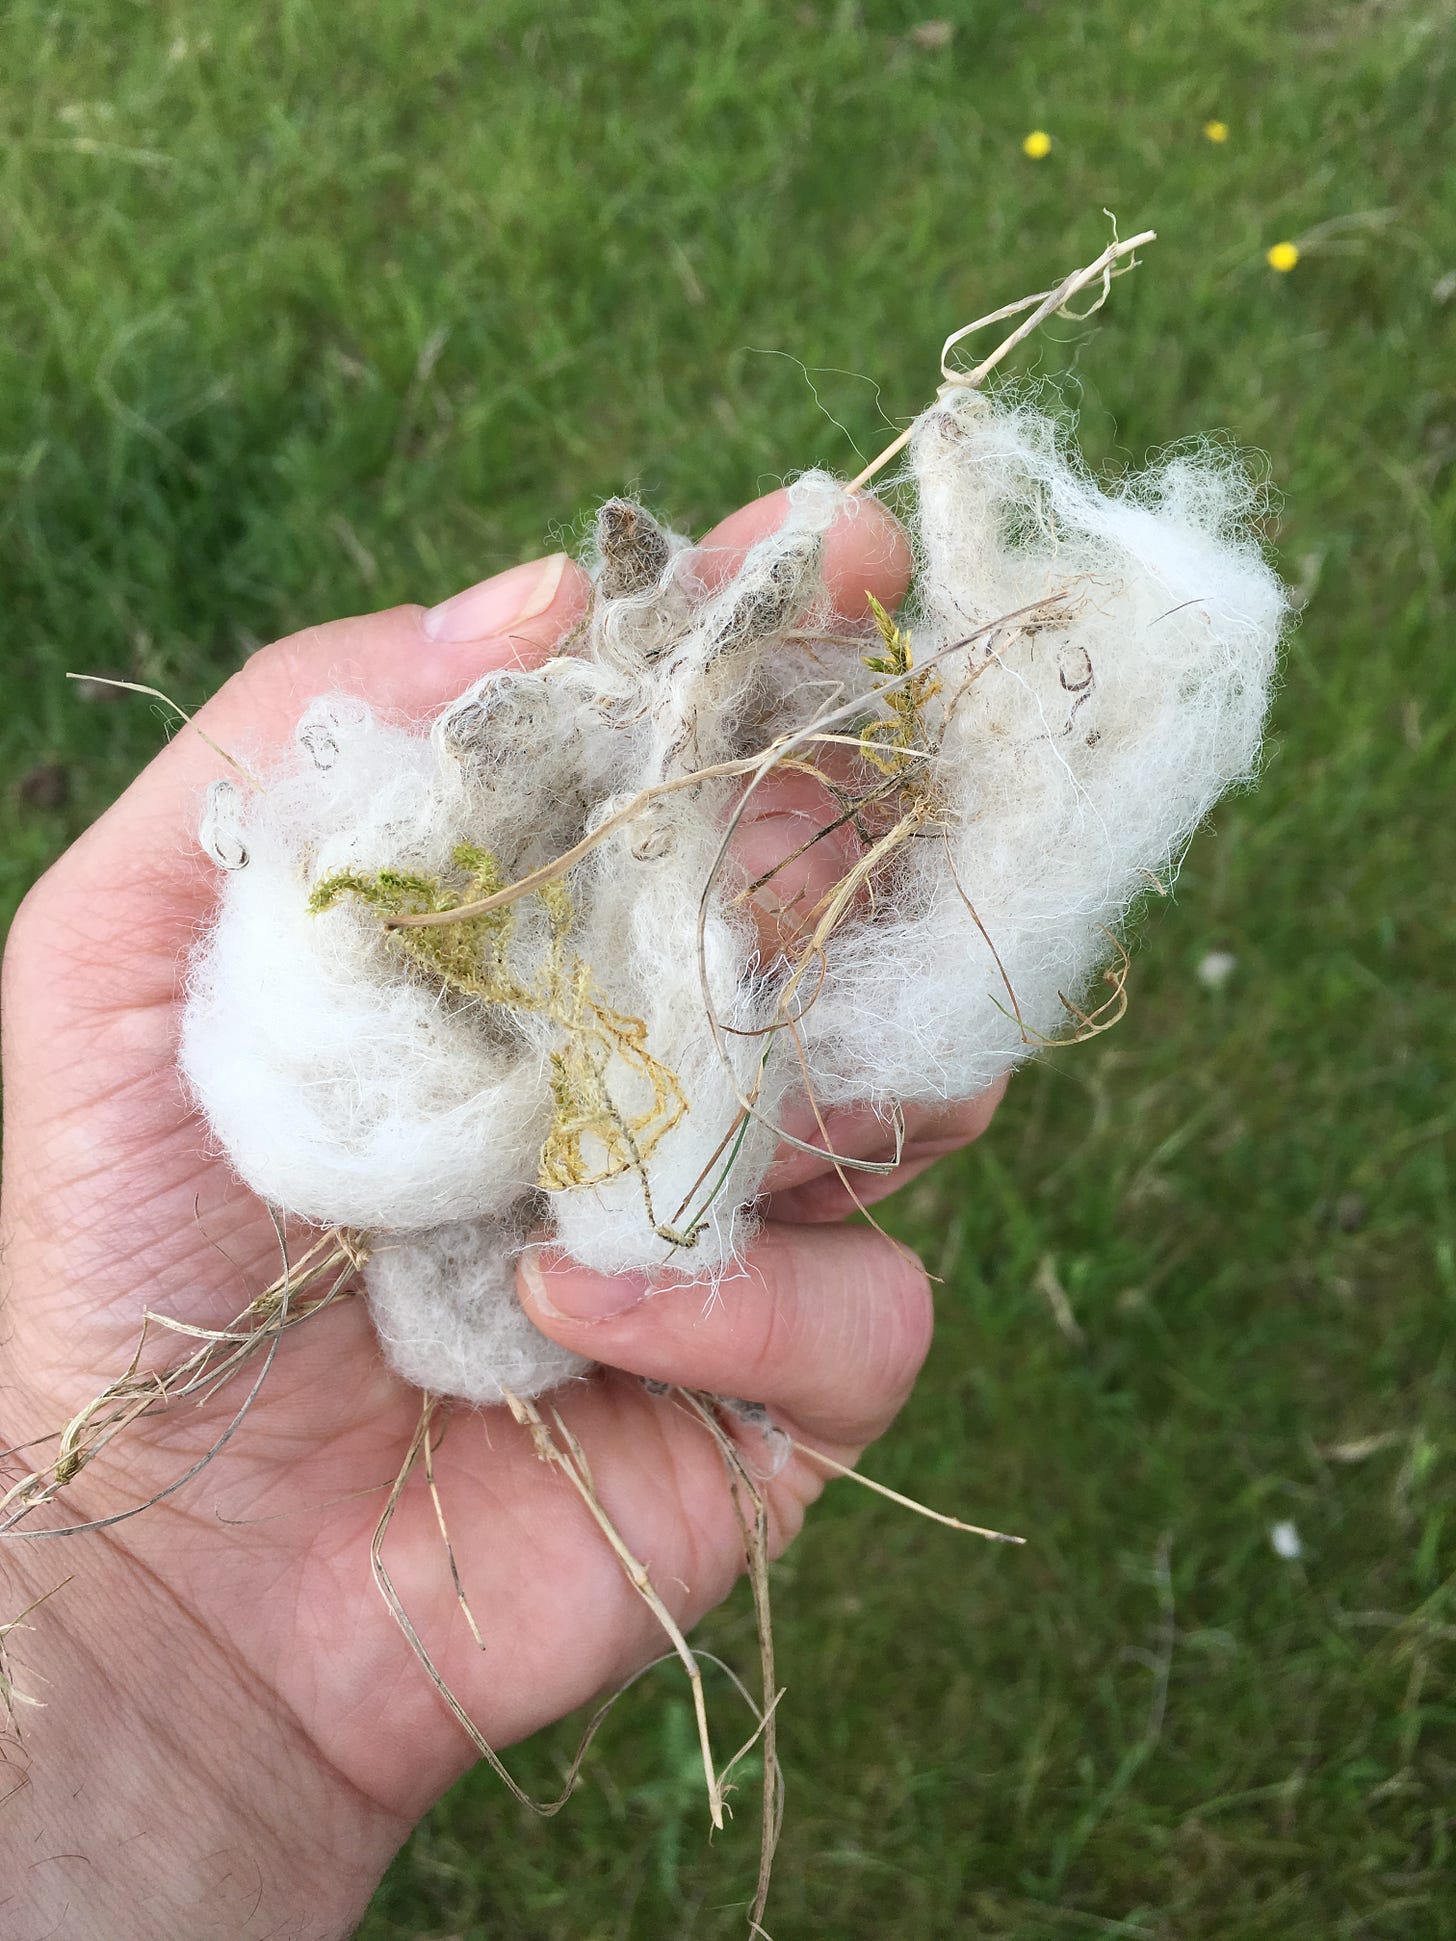 A left hand holding a tuft of sheep's wool entangled with grass and sheep turd or scab material.